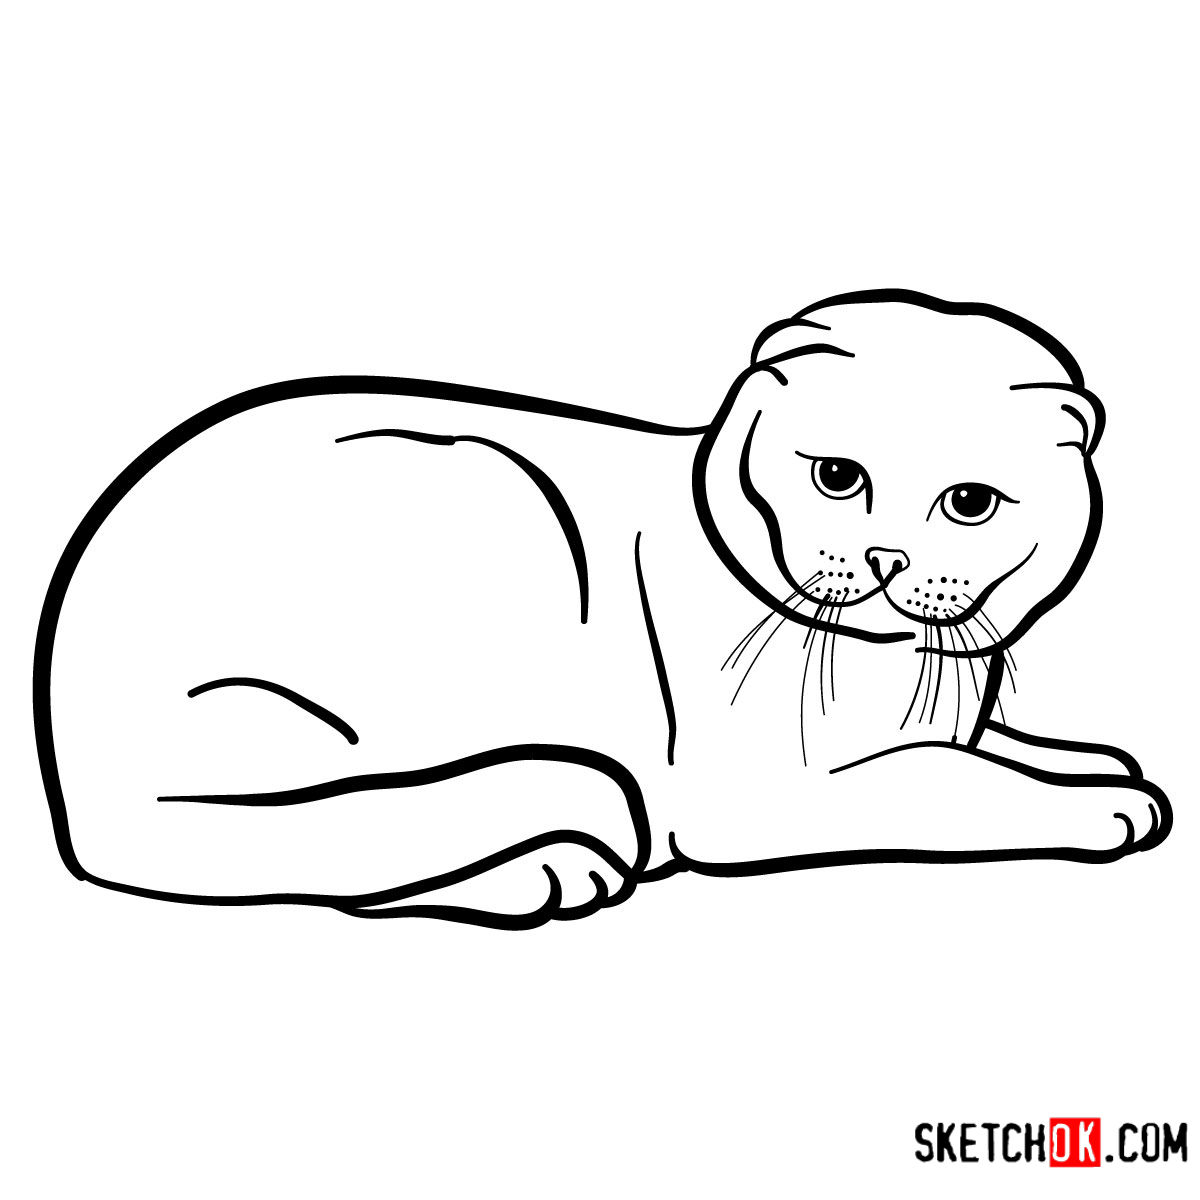 How to draw the Scottish Fold cat